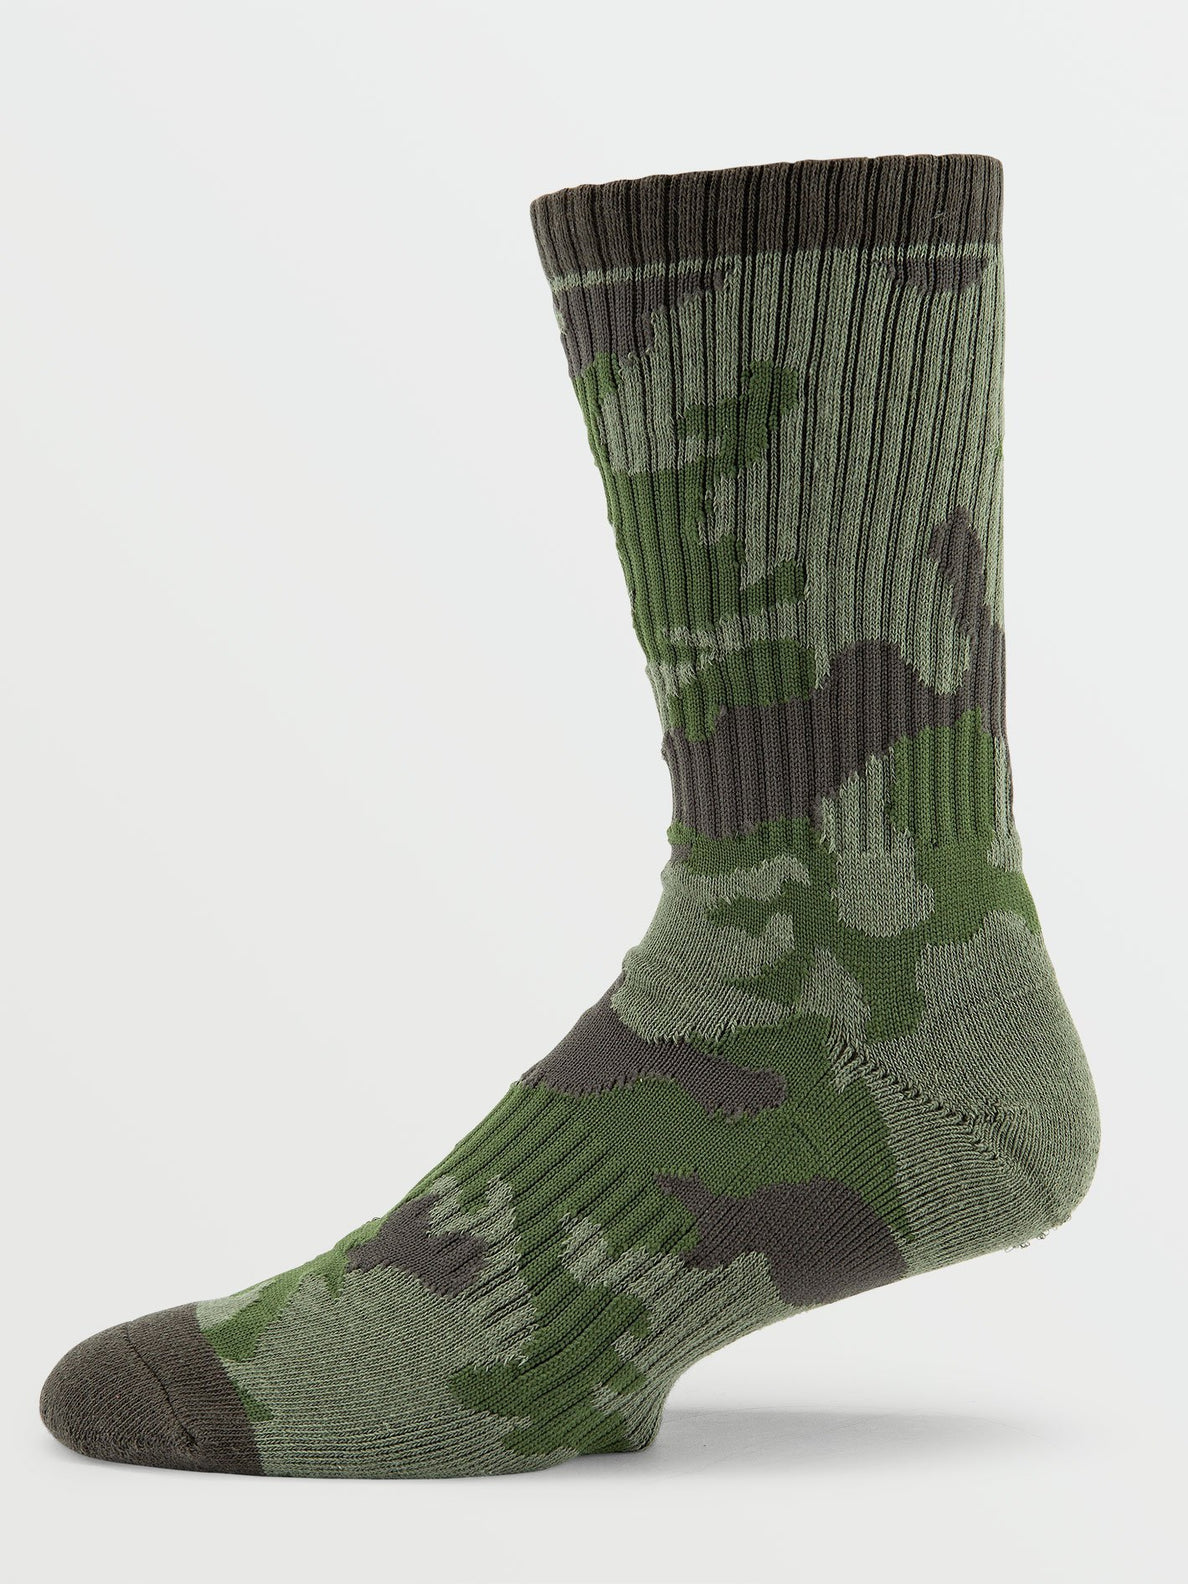 Chaussettes Vibes - ARMY